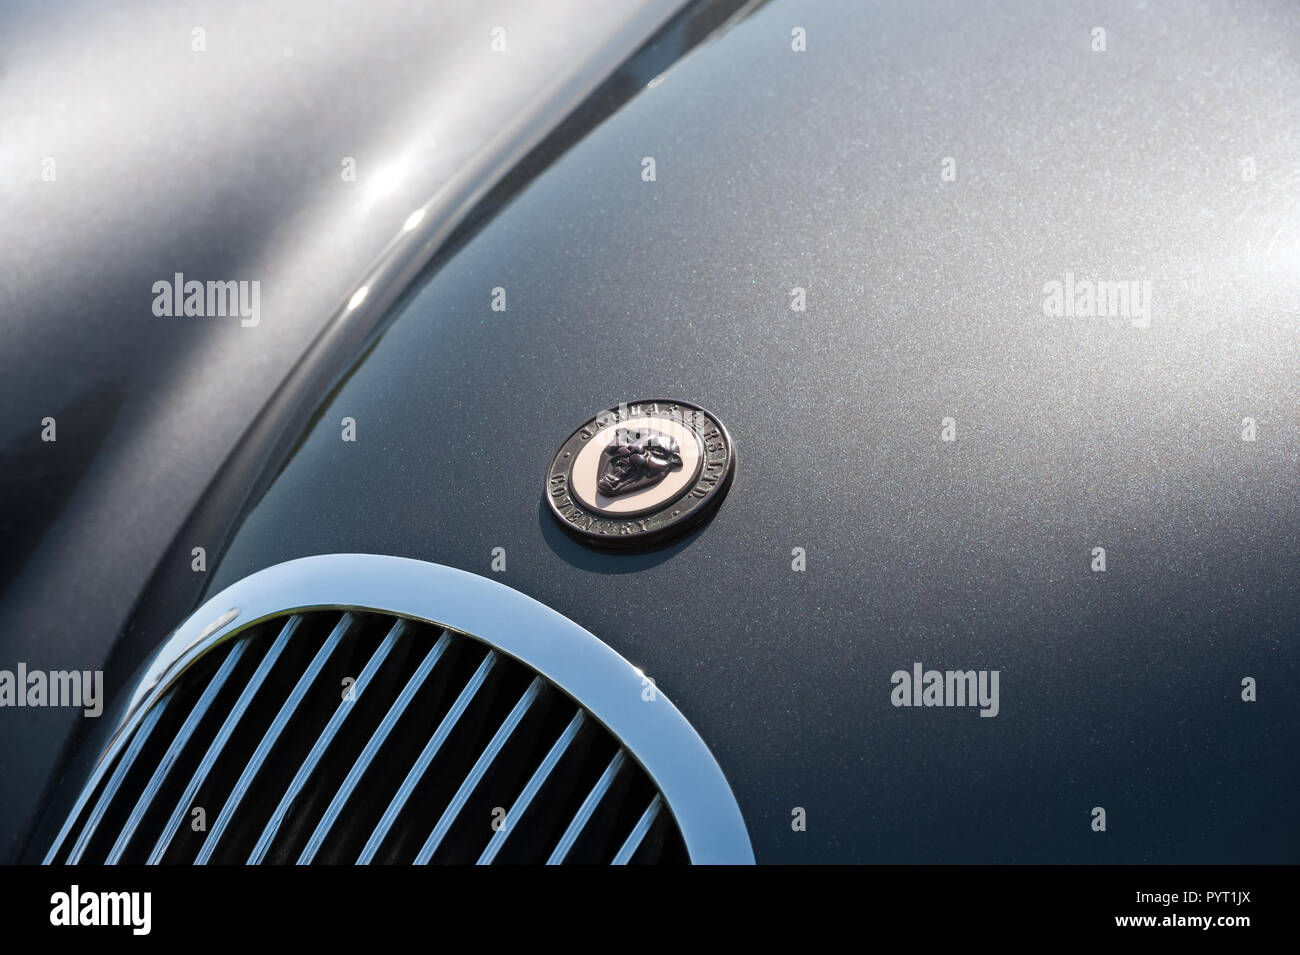 Yateley, UK - May 7, 2018: Close-up vehicle insignia and metallic paintwork on a vintage Jaguar automobile. Stock Photo